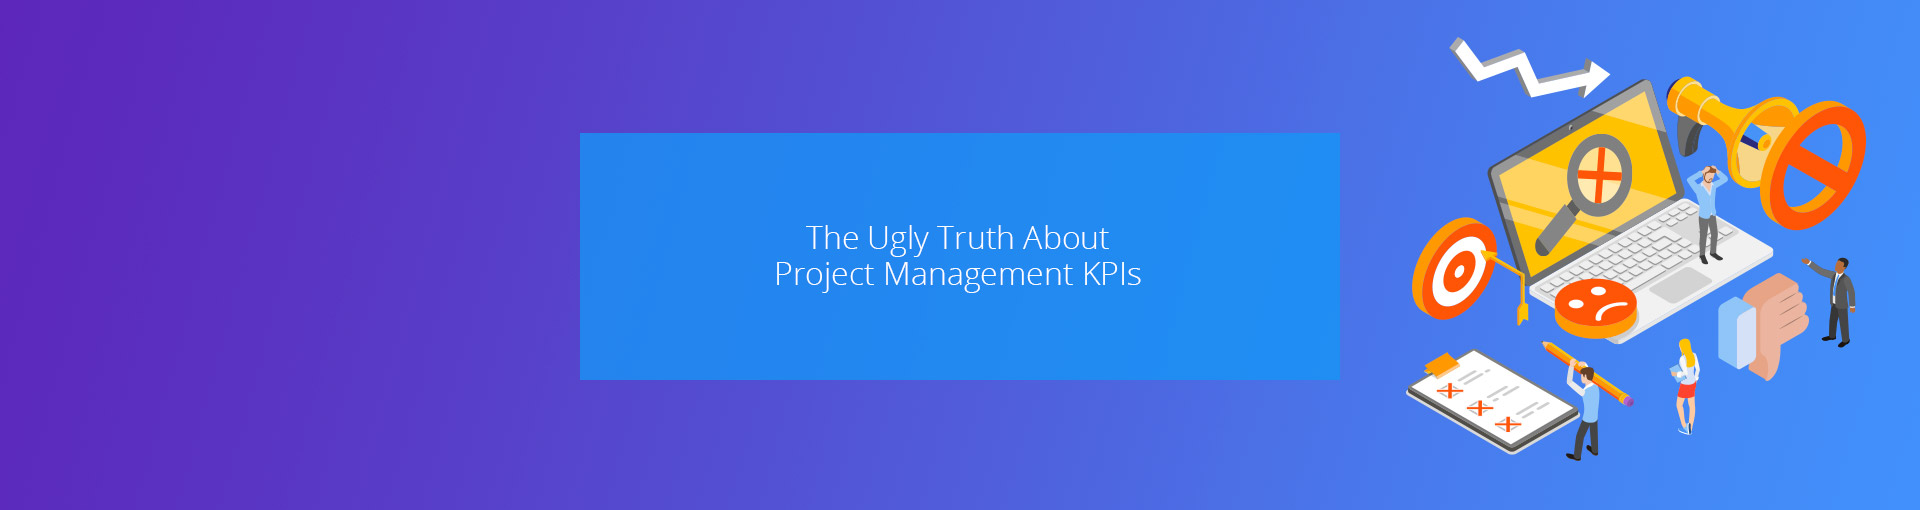 The Ugly Truth About Project Management KPIs Featured Image